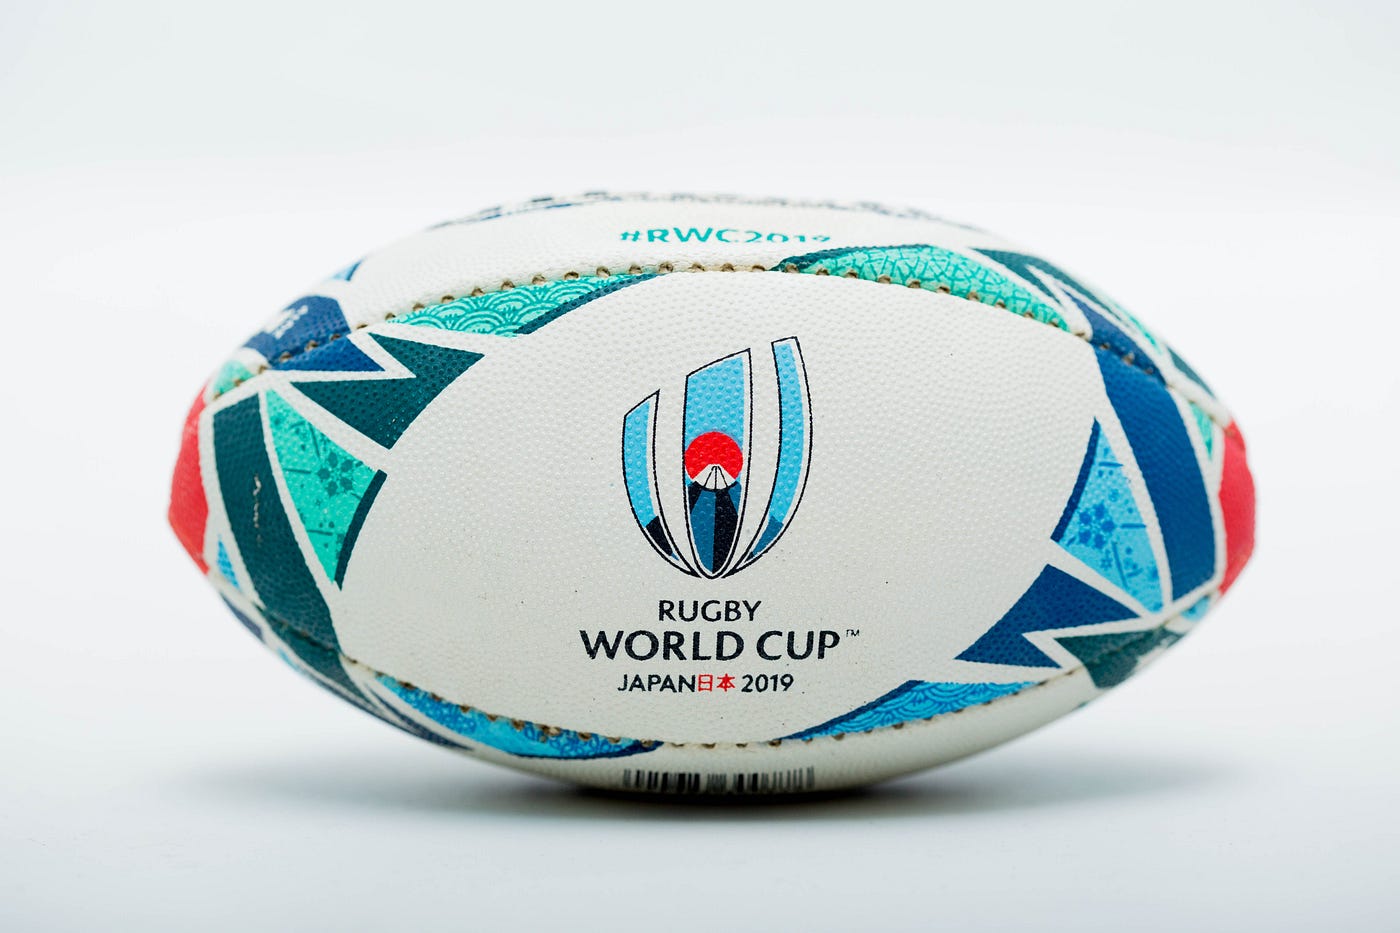 The Rugby World Cup 2023 Shows That Multichoice Needs To Rethink Its Business Model In Africa For Live Sports Content